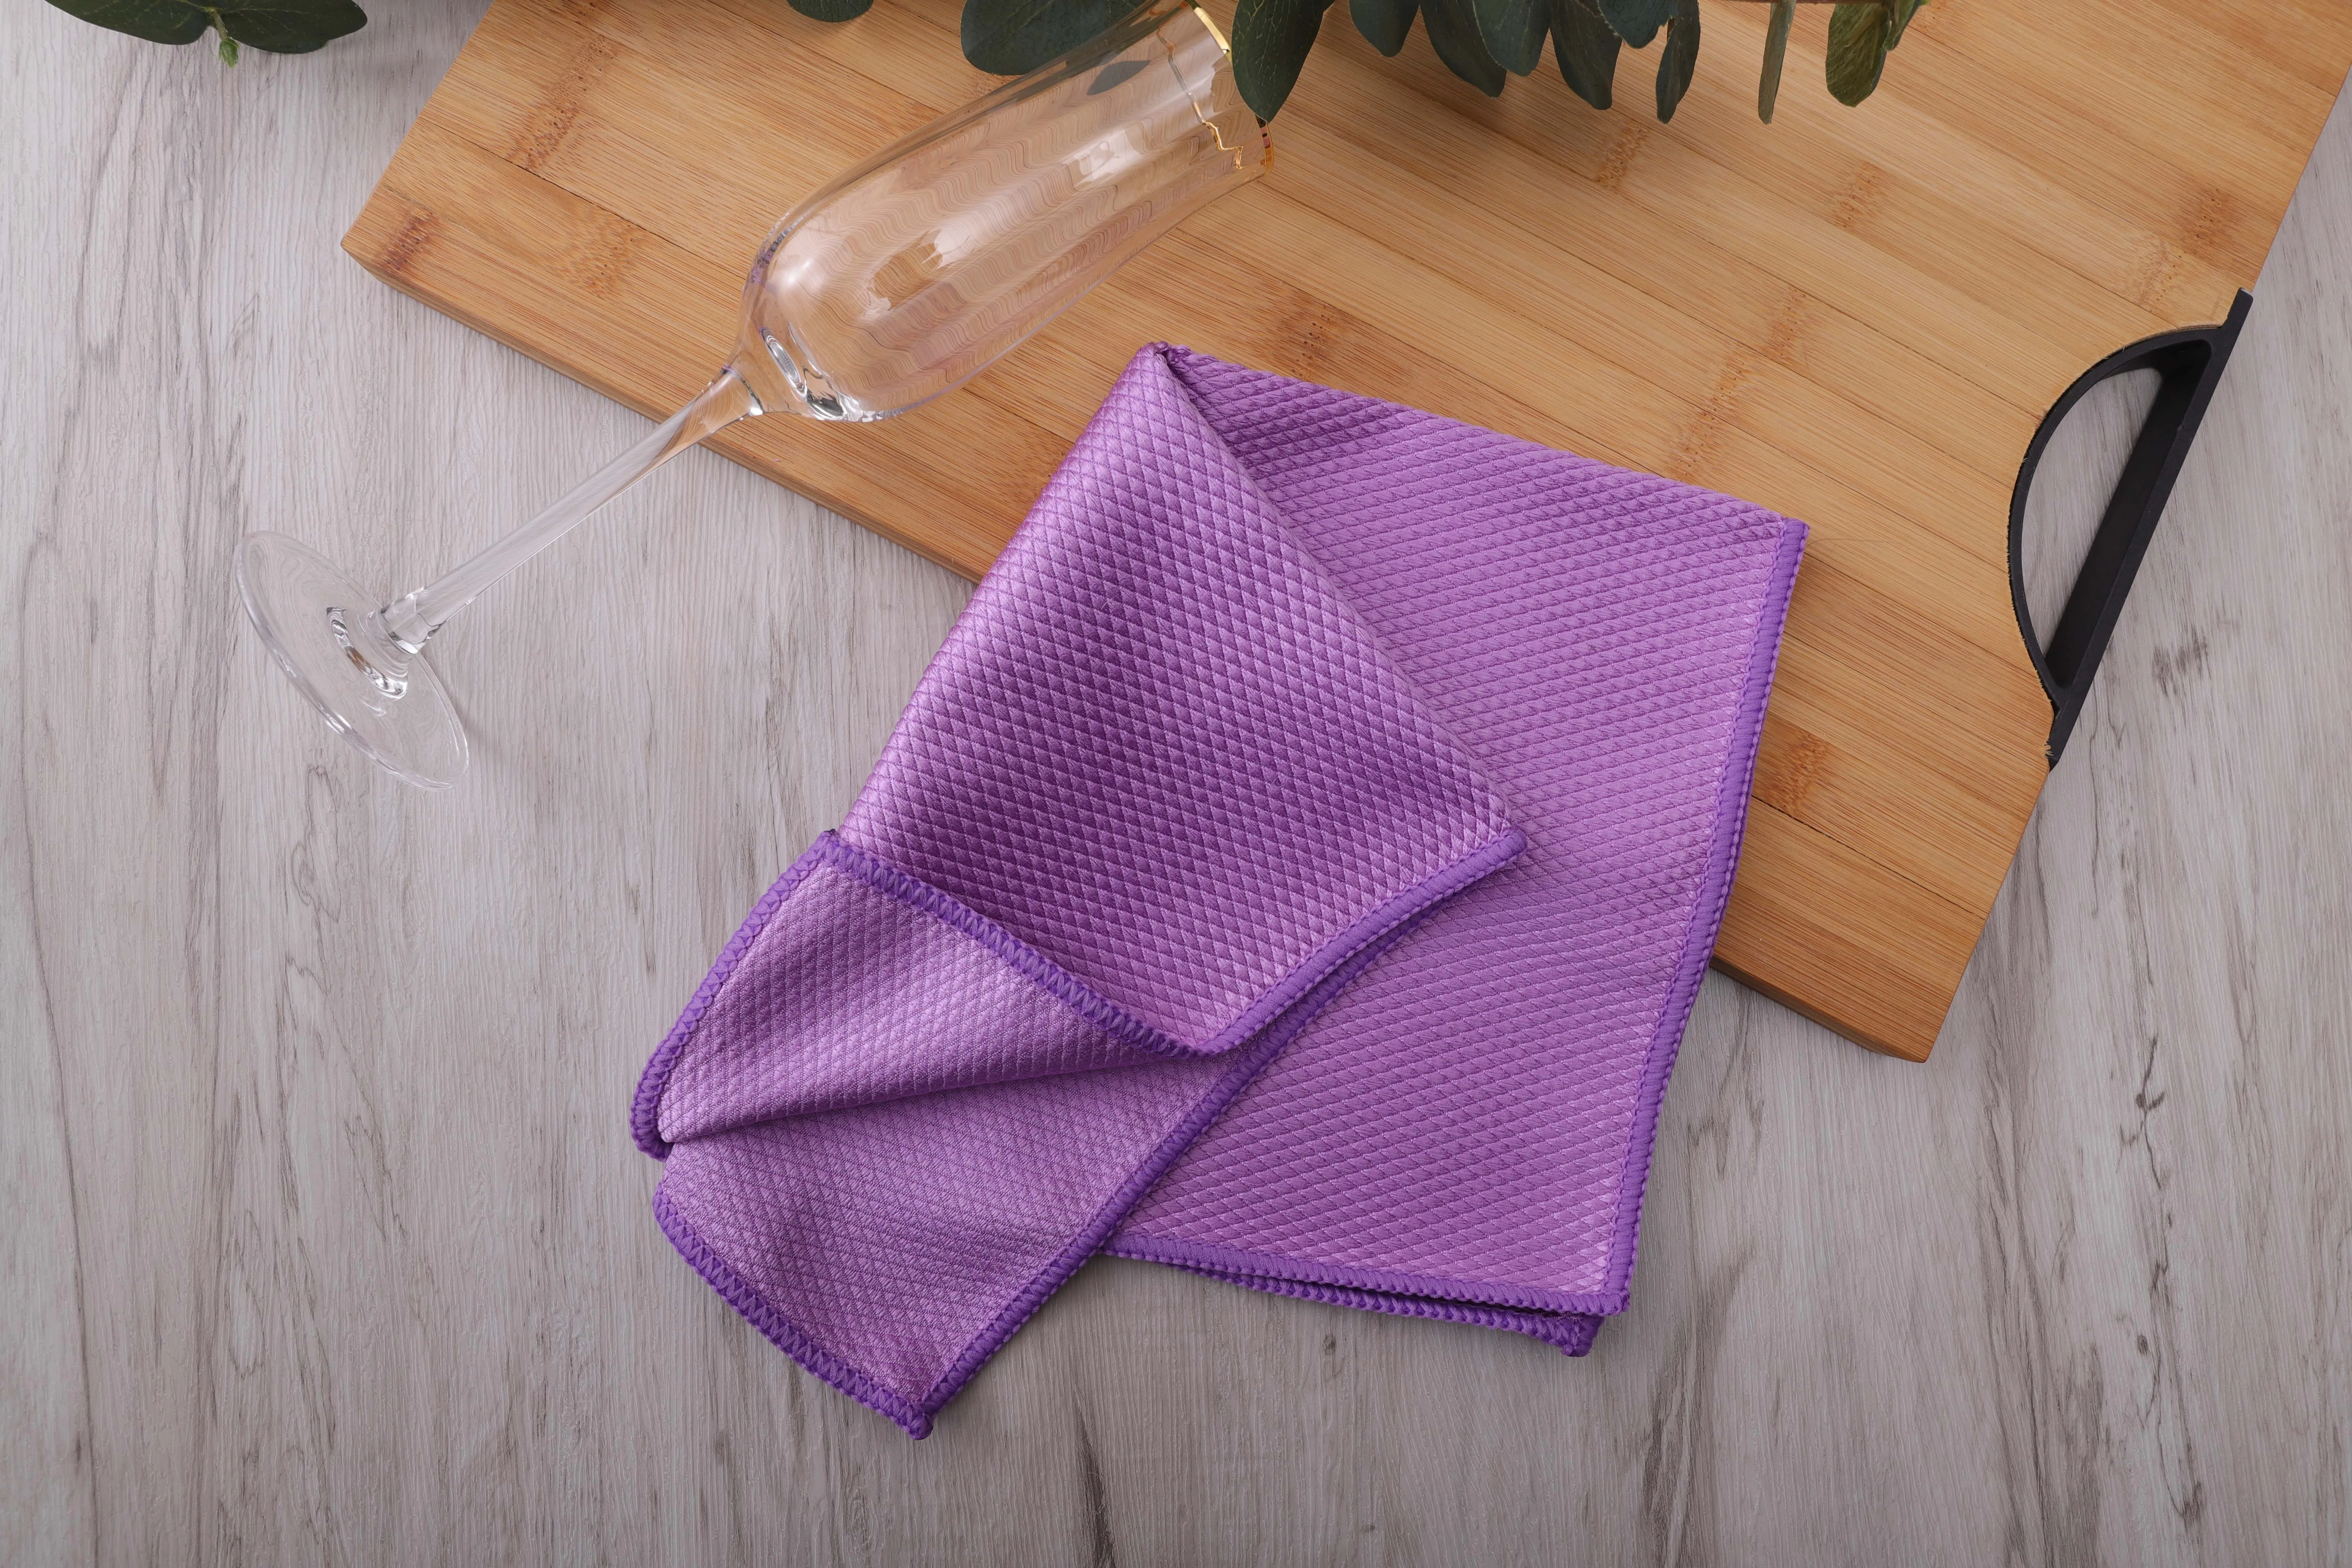 Glass Cleaning Cloth Kitchen Cleaning Absorbable Fish Scale Towel -D  factory and manufacturers